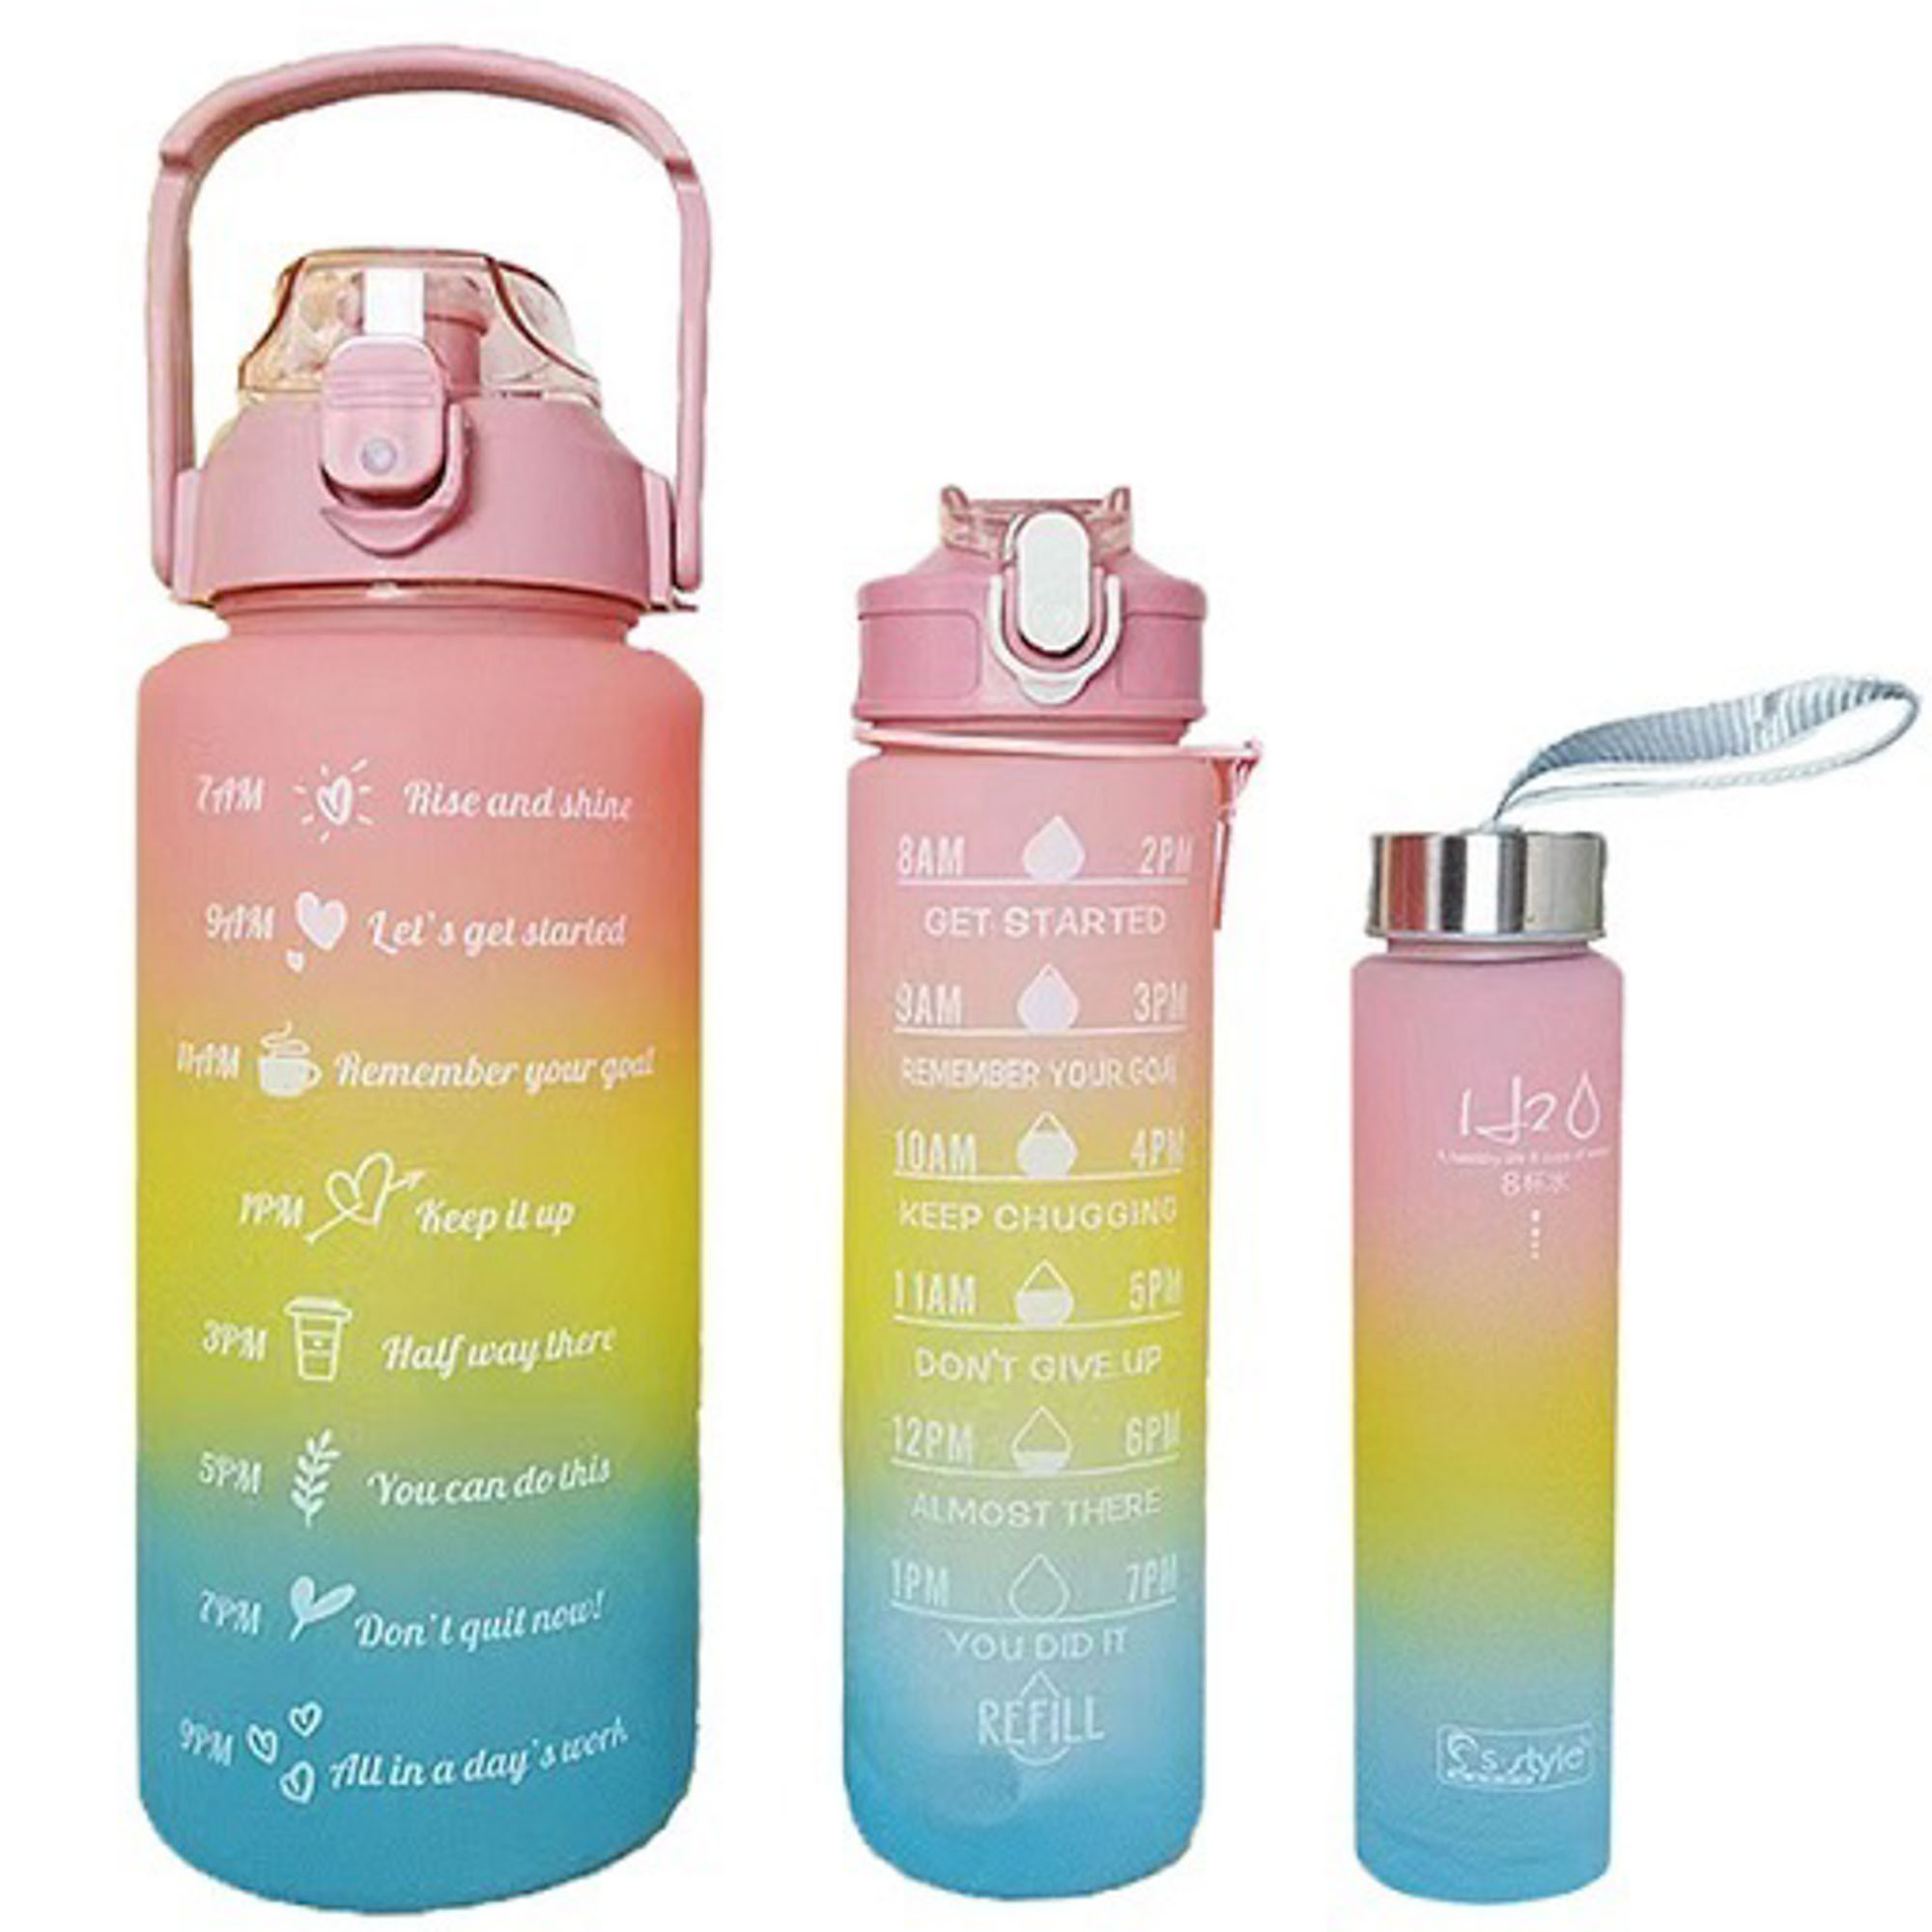 3-PIECE SET WATER BOTTLES WITH TIMES DRINK LEAKPROOF WATER BOTTLES